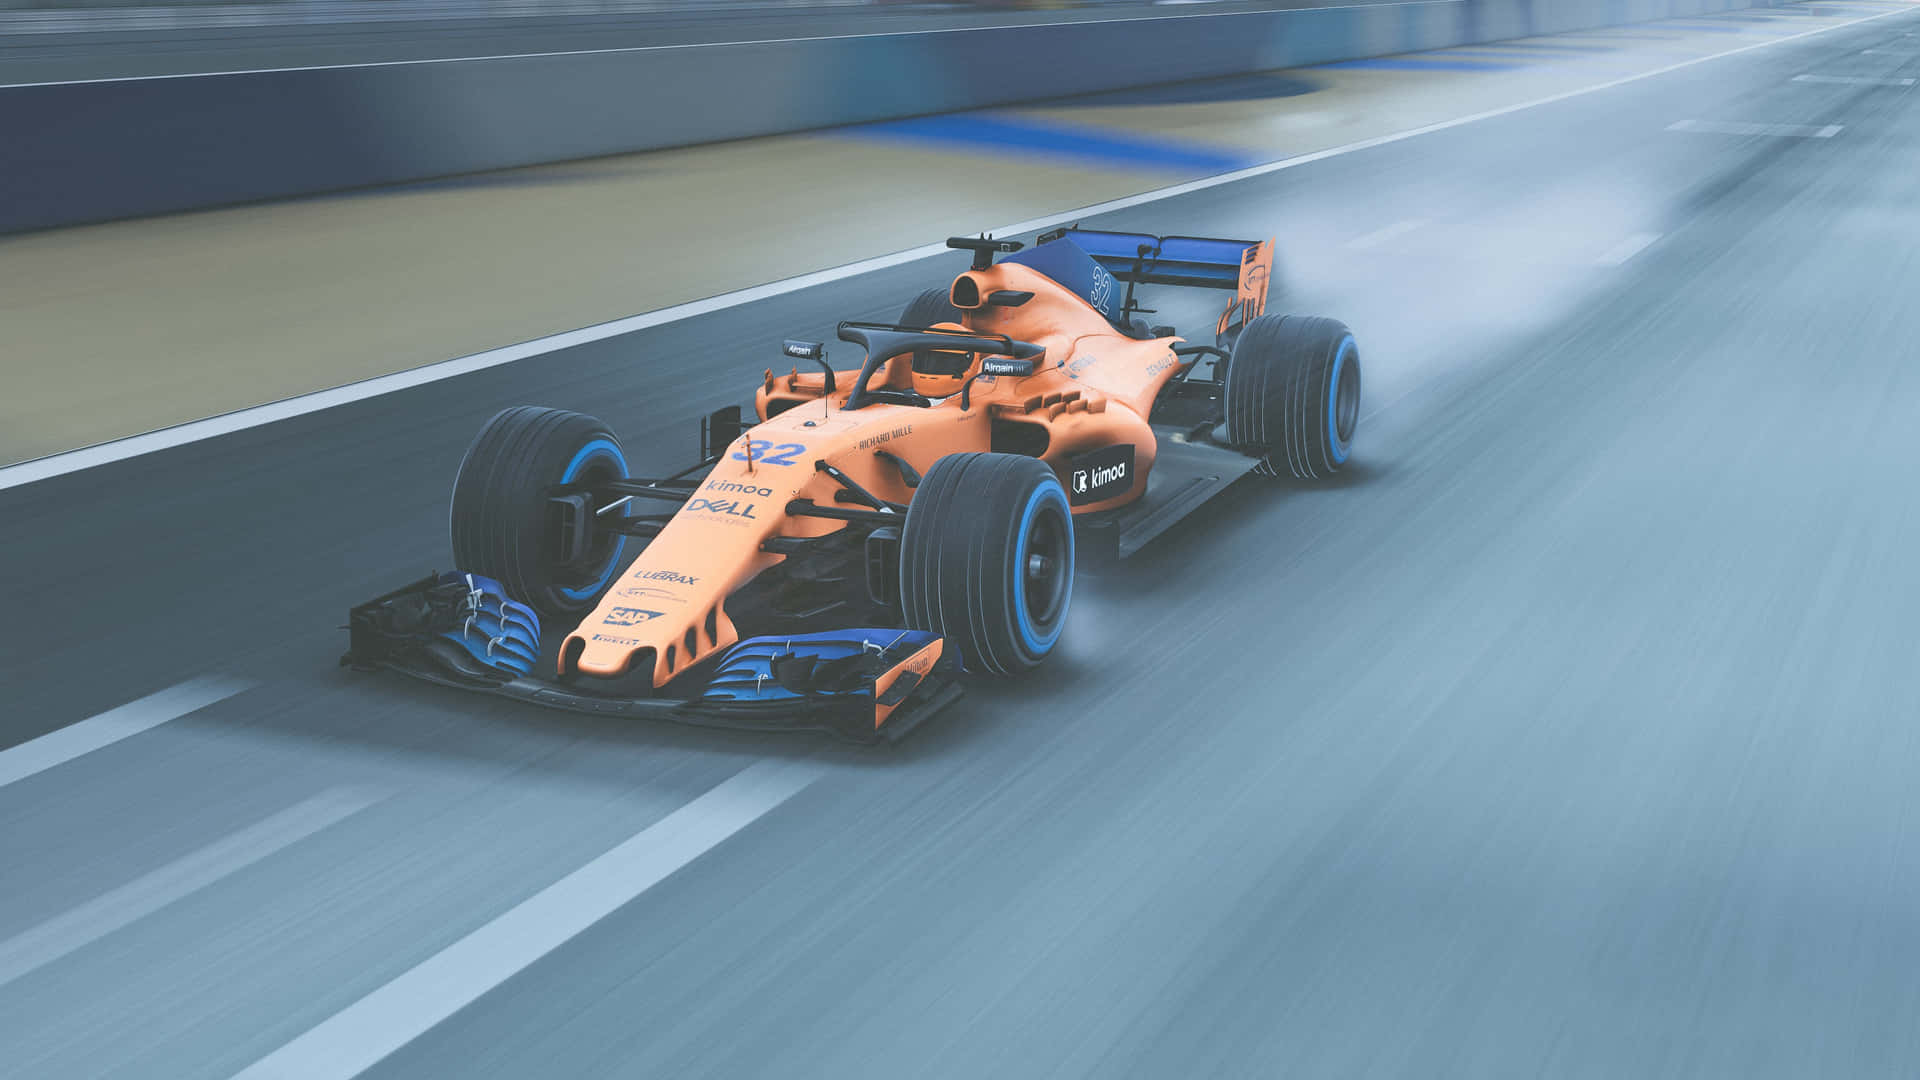 Get ready for the speed and adrenaline of the McLaren Formula 1 race Wallpaper